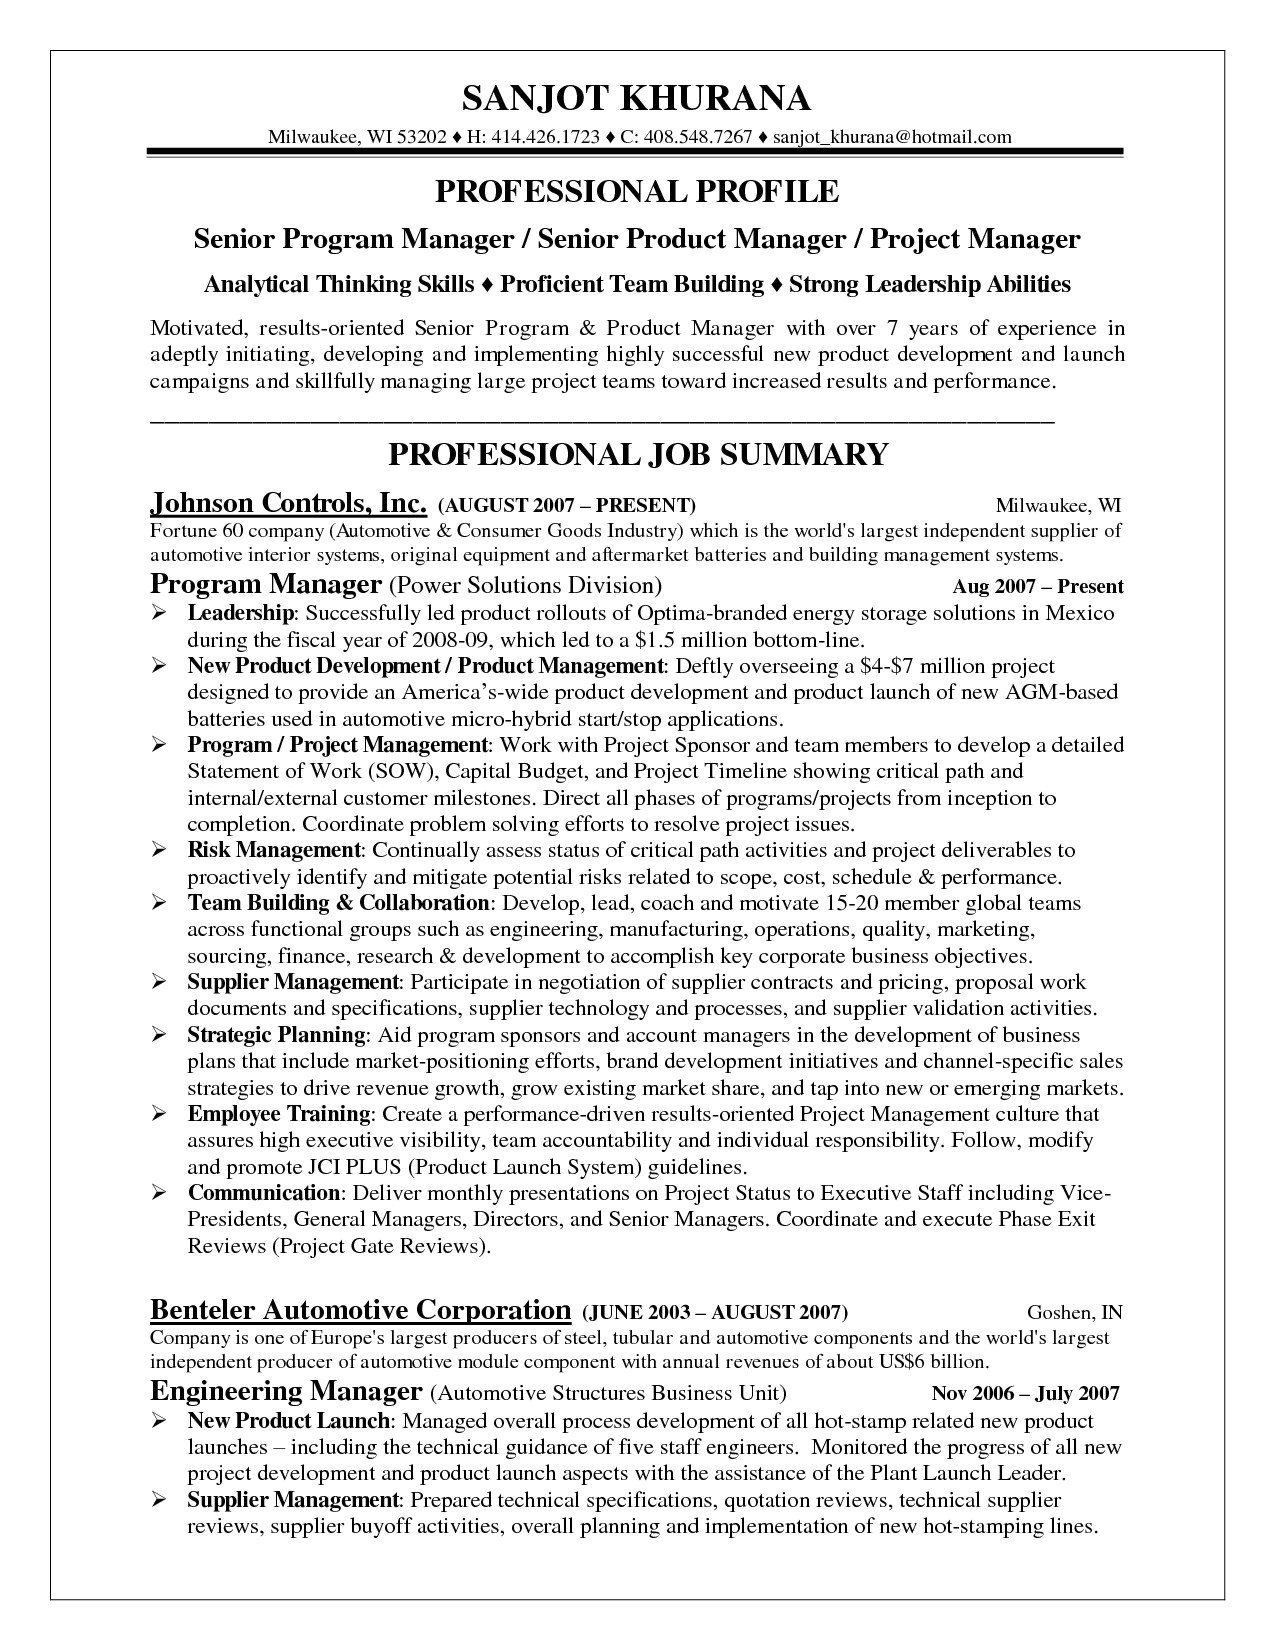 resume samples for marketing manager of products